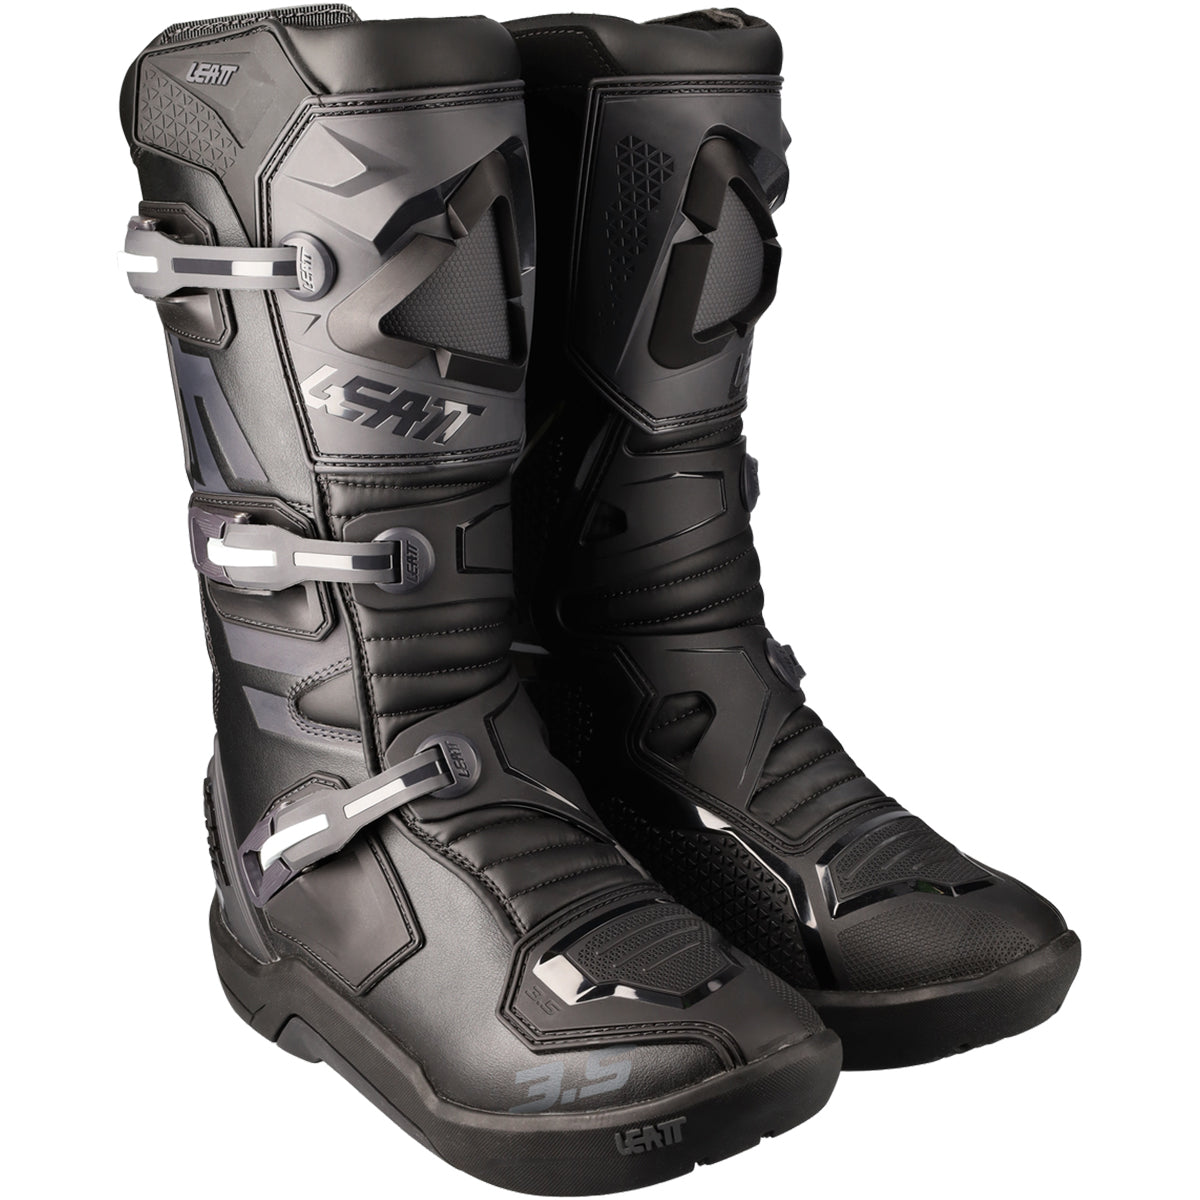 Leatt 3.5 V22 Adult Boots Without Tags) – Haustrom.com | Shop Action Sports